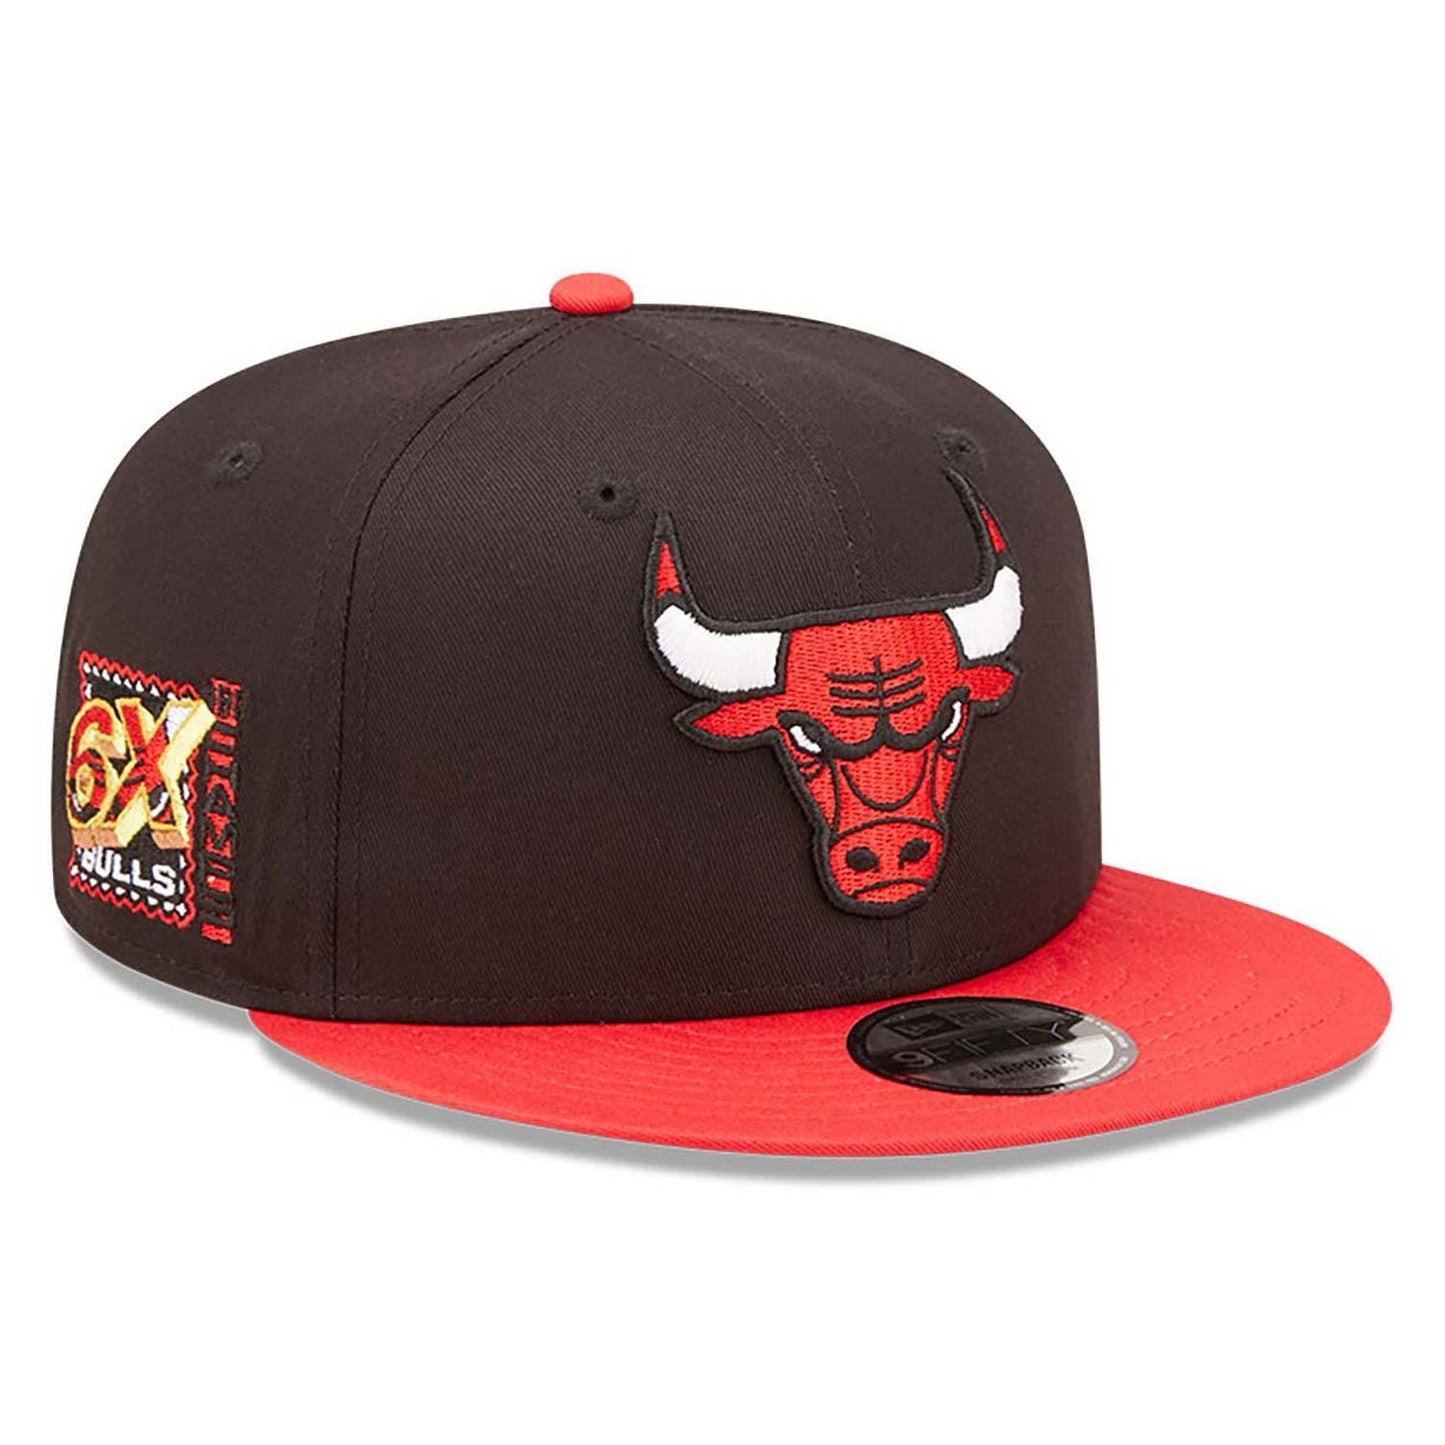 NEW ERA 9FIFTY TEAM PATCH CHICAGO BULLS TWO TONE SNAPBACK